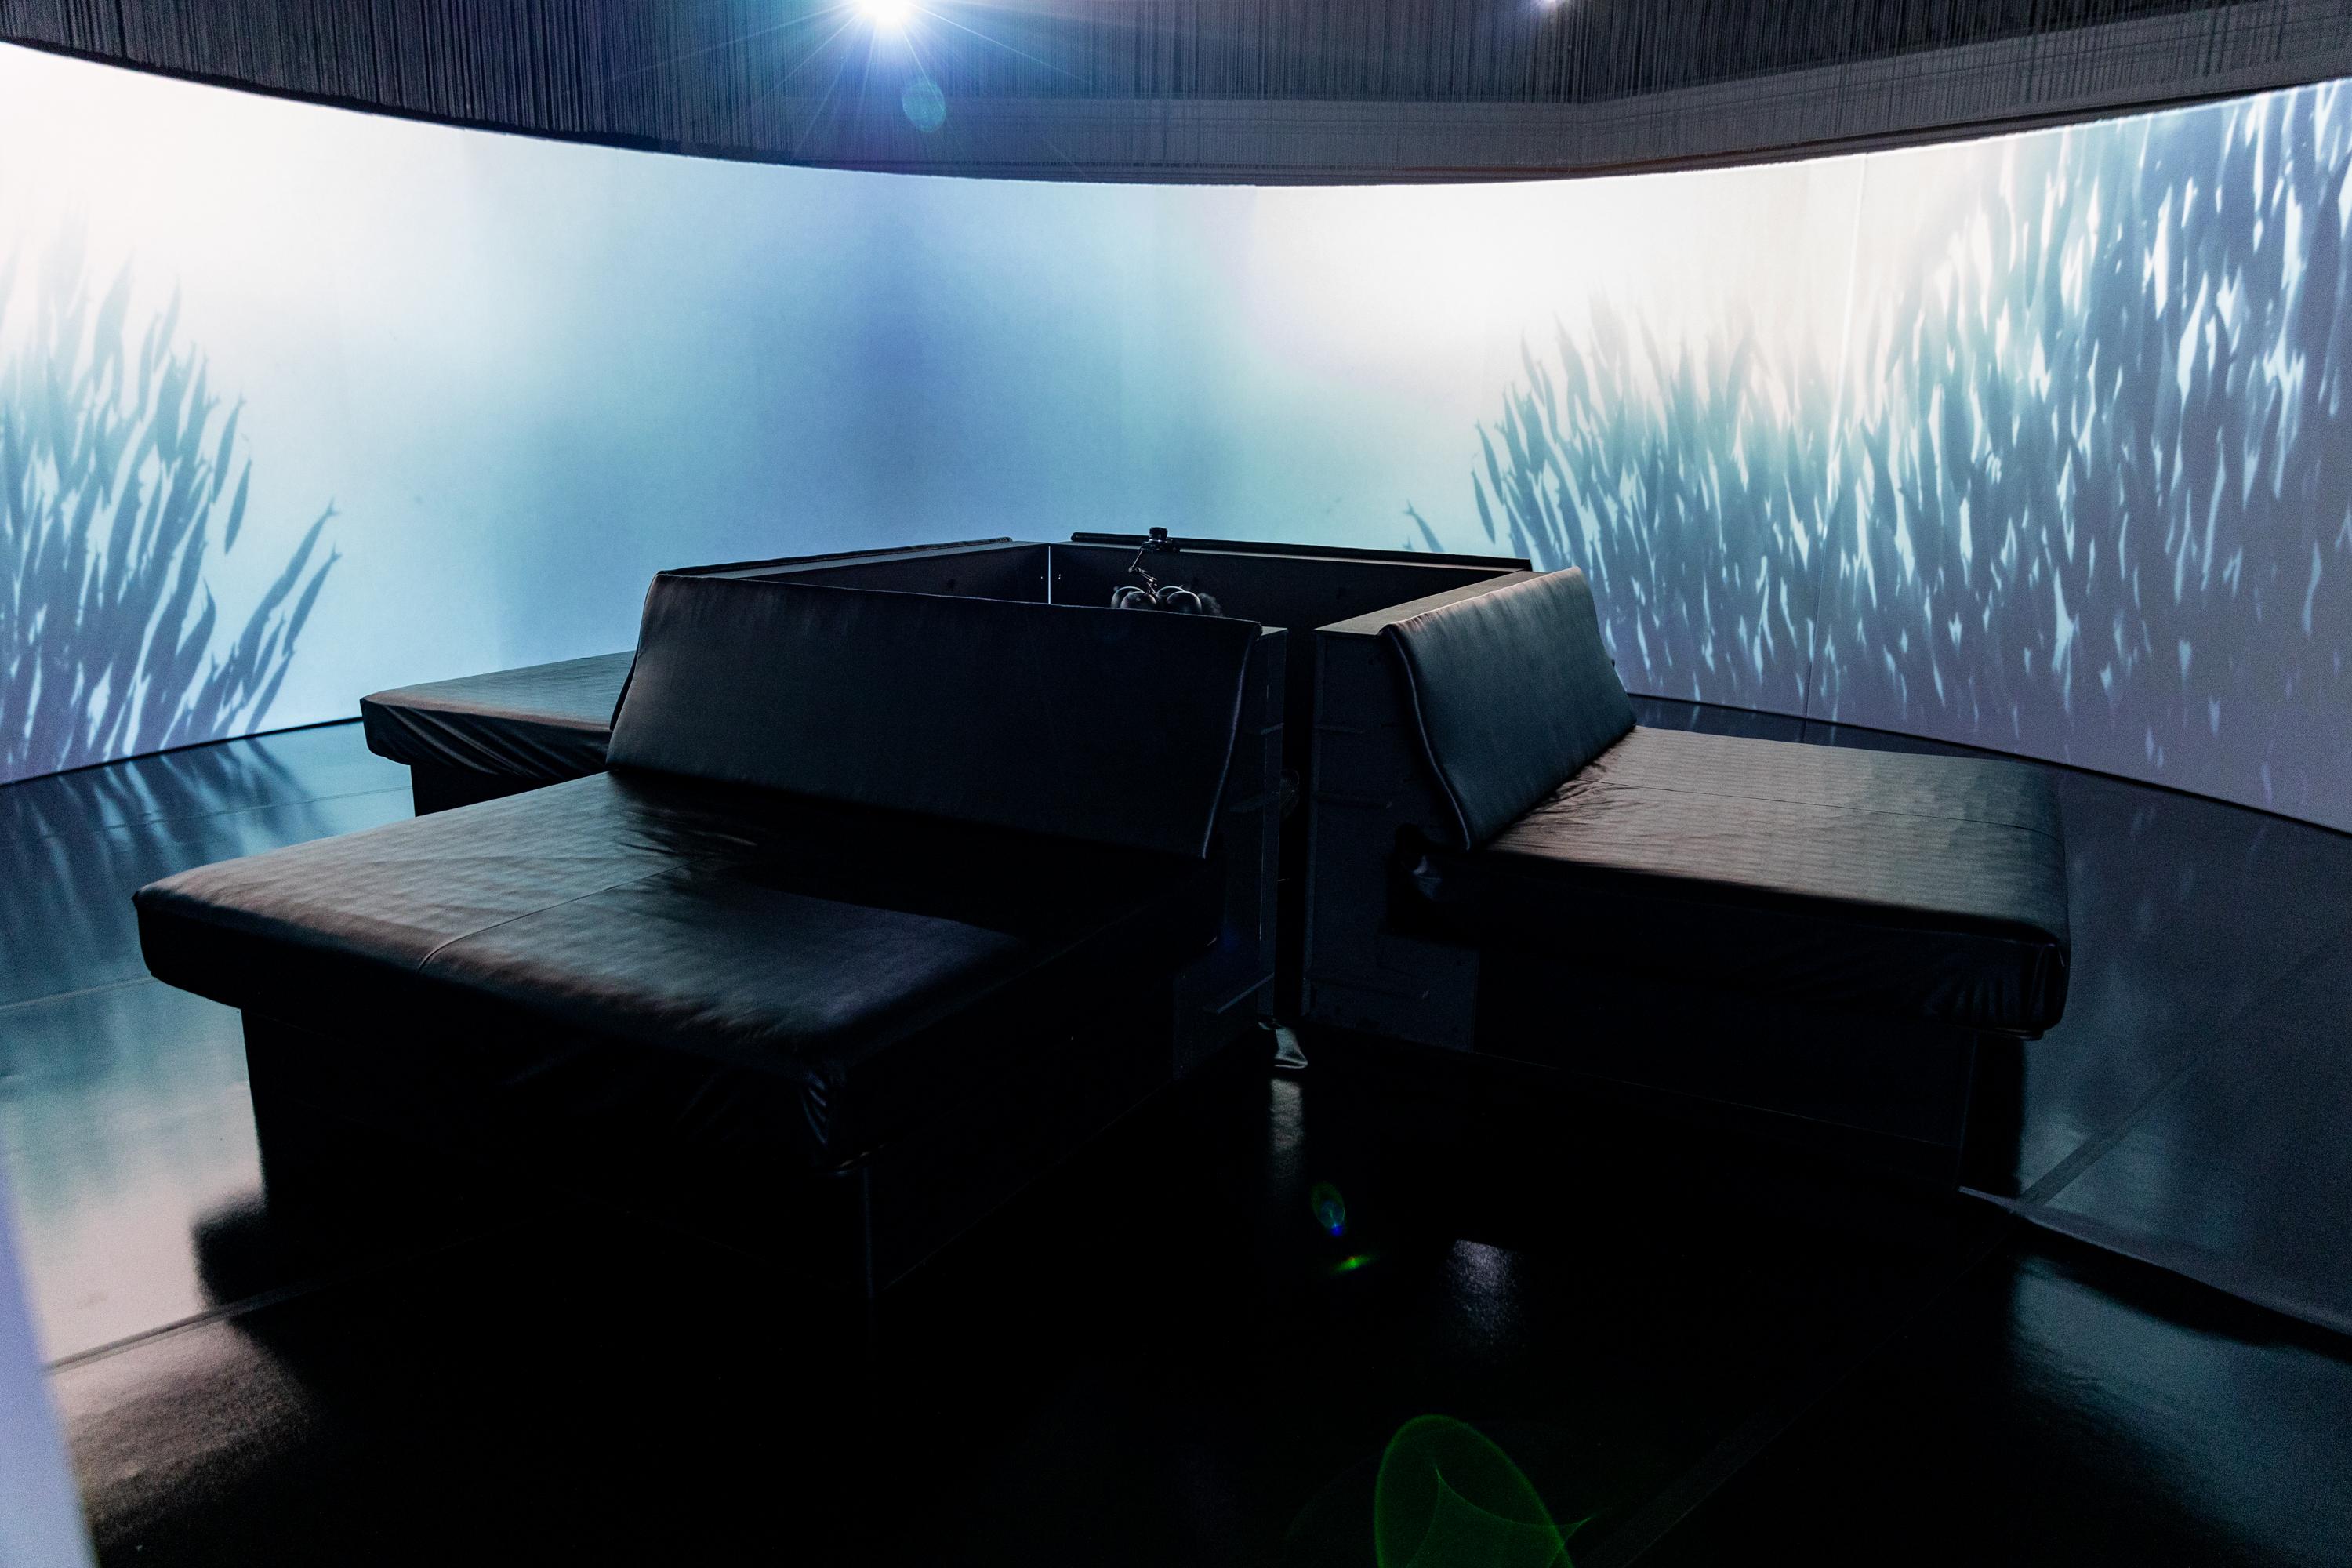 A kinetic seating arrangement in front of a circular panorama projection screen driven by a Screenberry media server